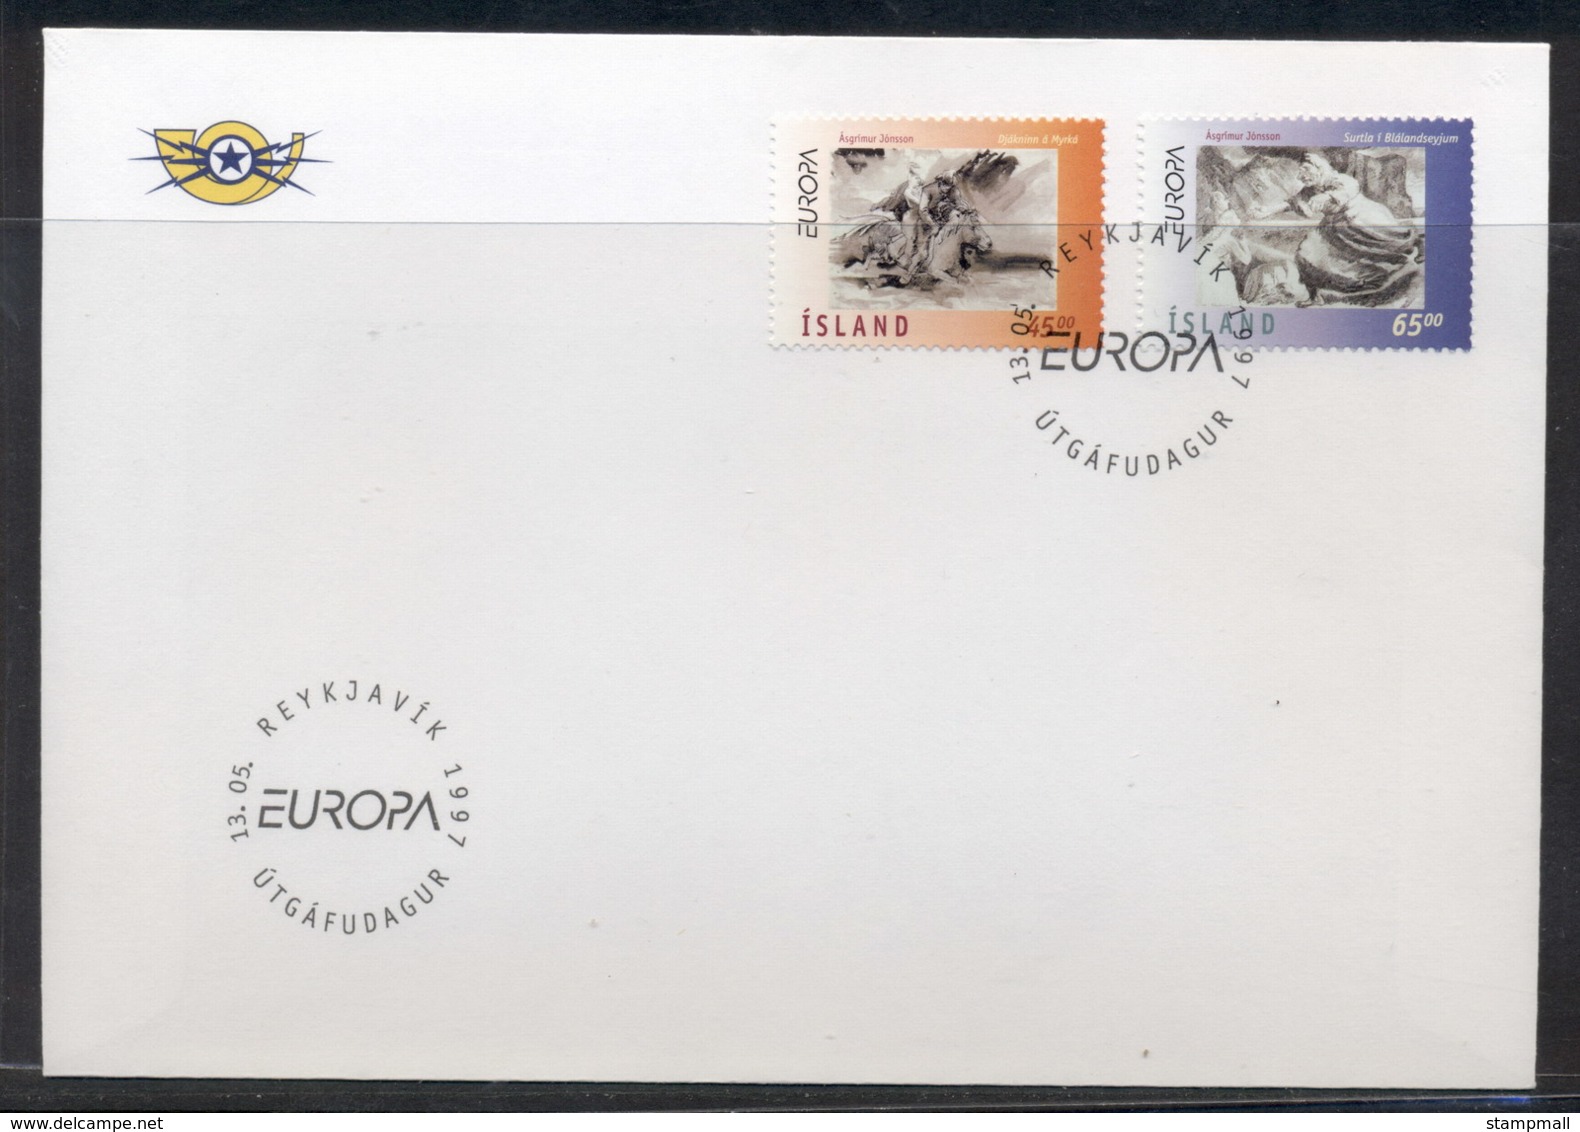 Iceland 1997 Europa Myths & Legends FDC - FDC